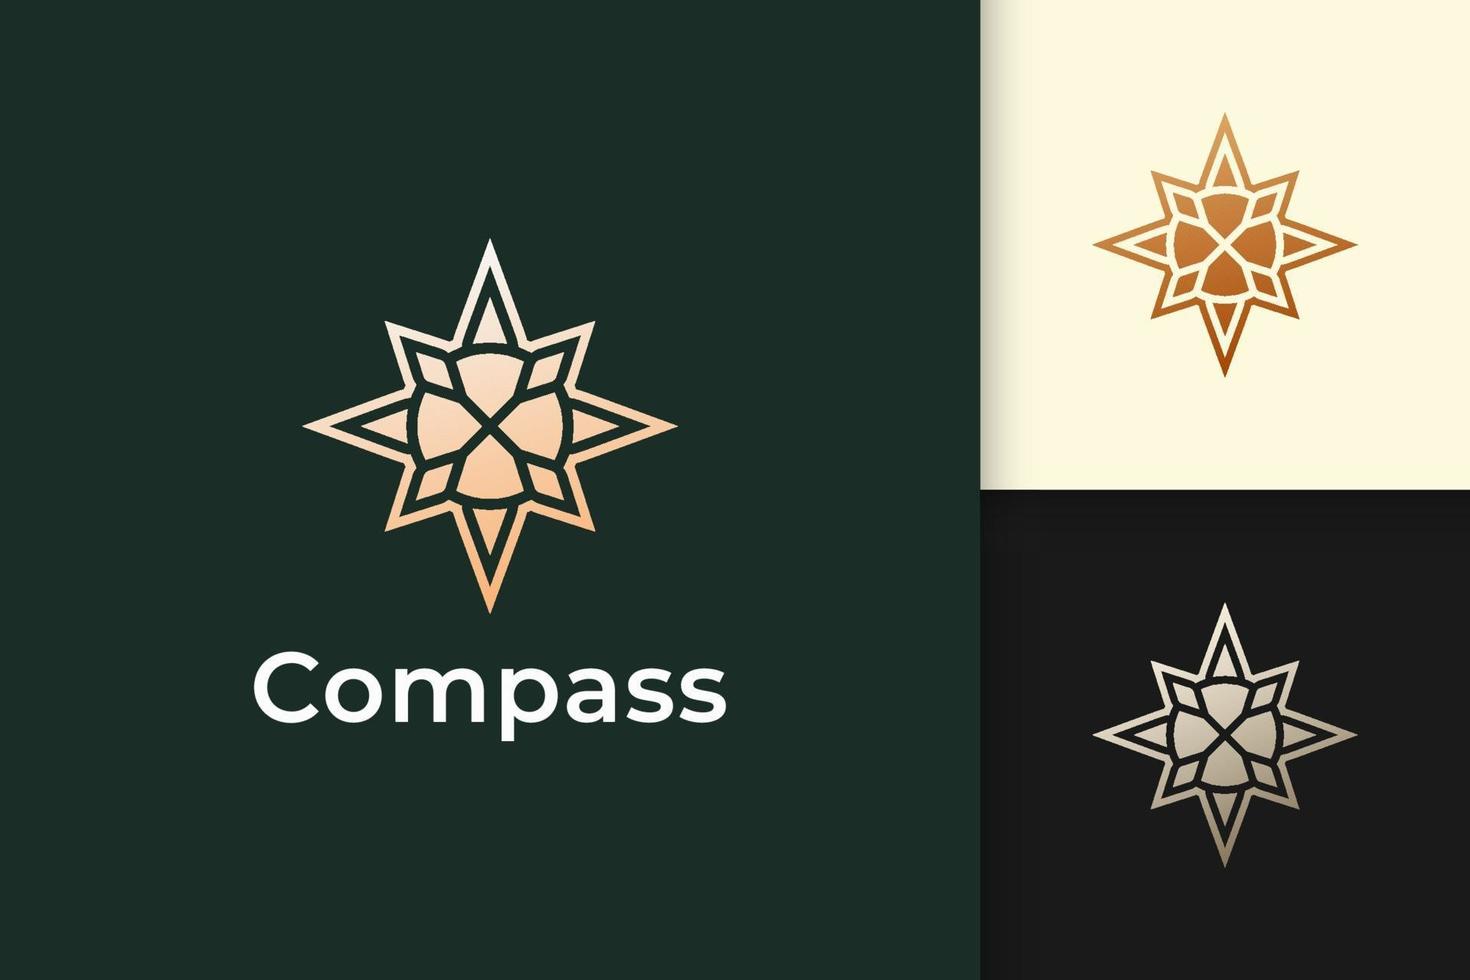 Compass logo in modern and luxury style with gold color vector